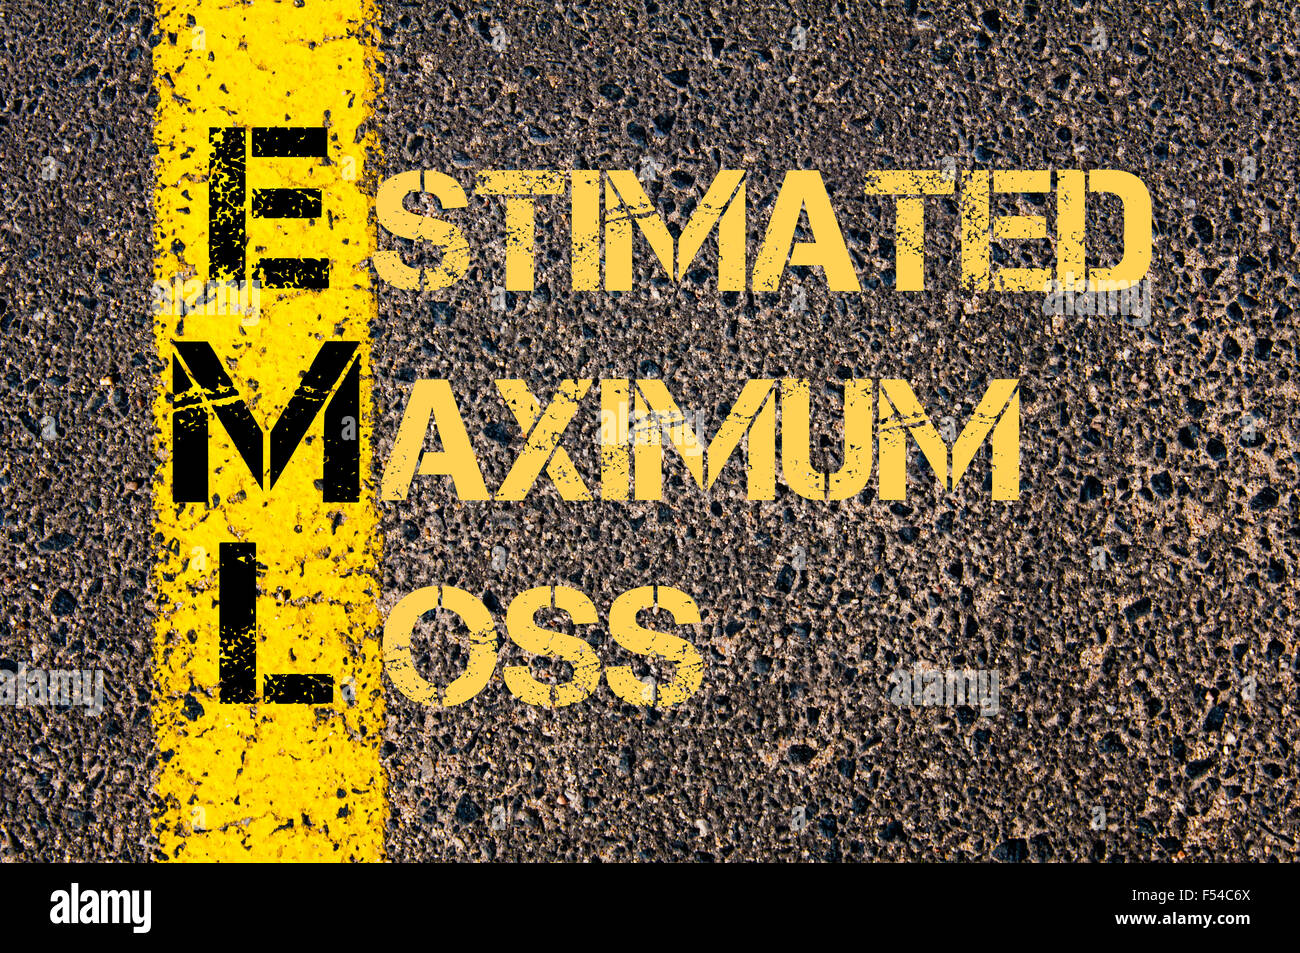 Concept image of Business Acronym EML as ESTIMATED MAXIMUM LOSS written over road marking yellow paint line. Stock Photo